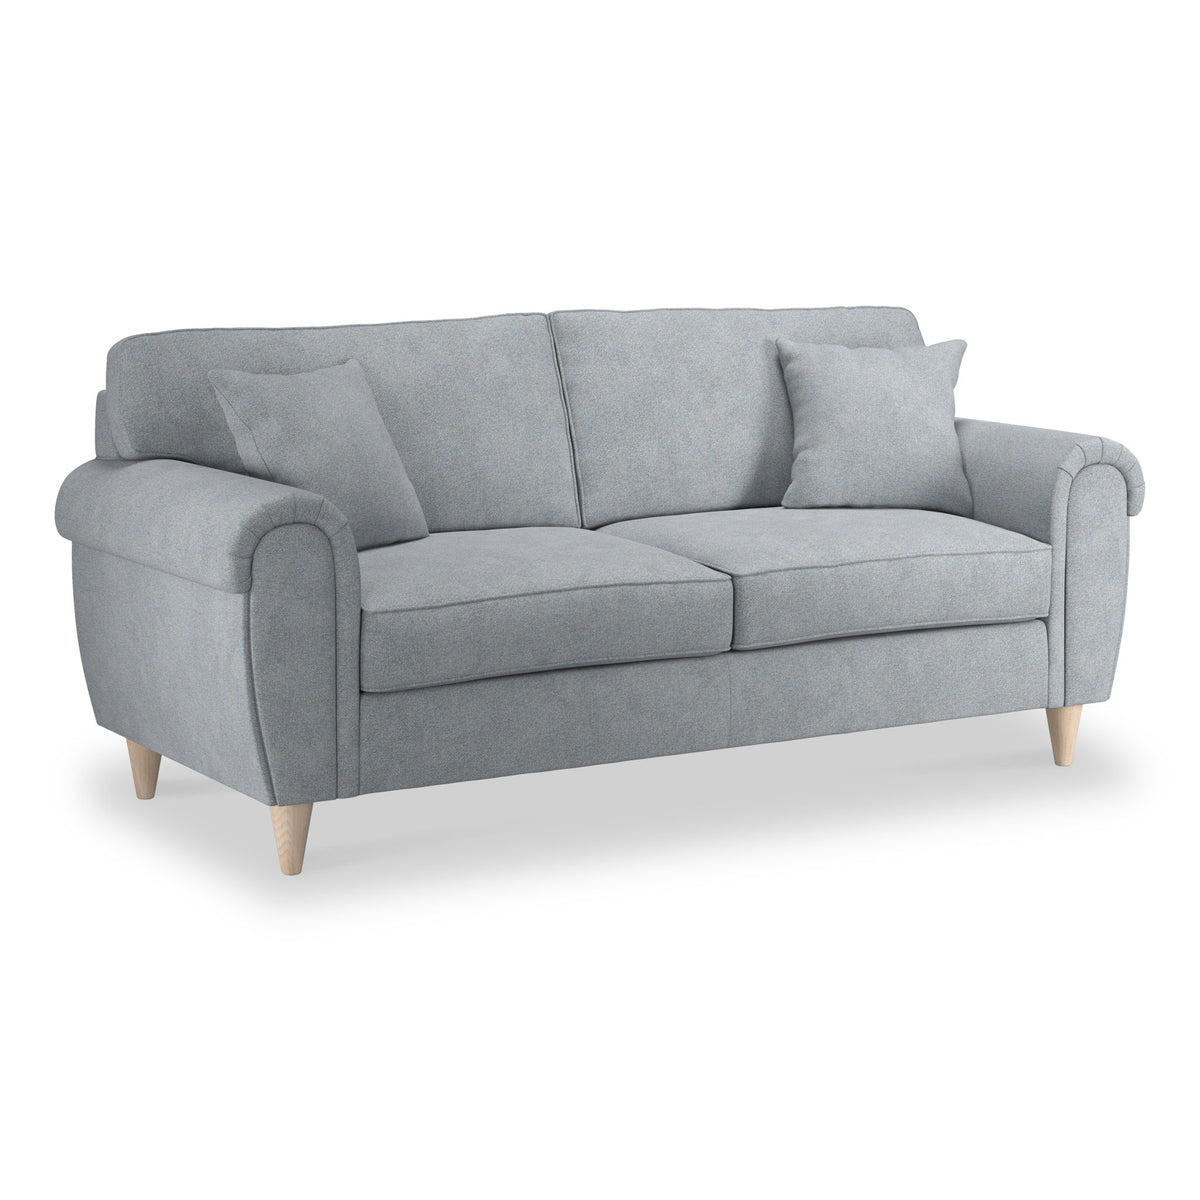 Harry Light Blue 3 Seater Sofa from Roseland Furniture